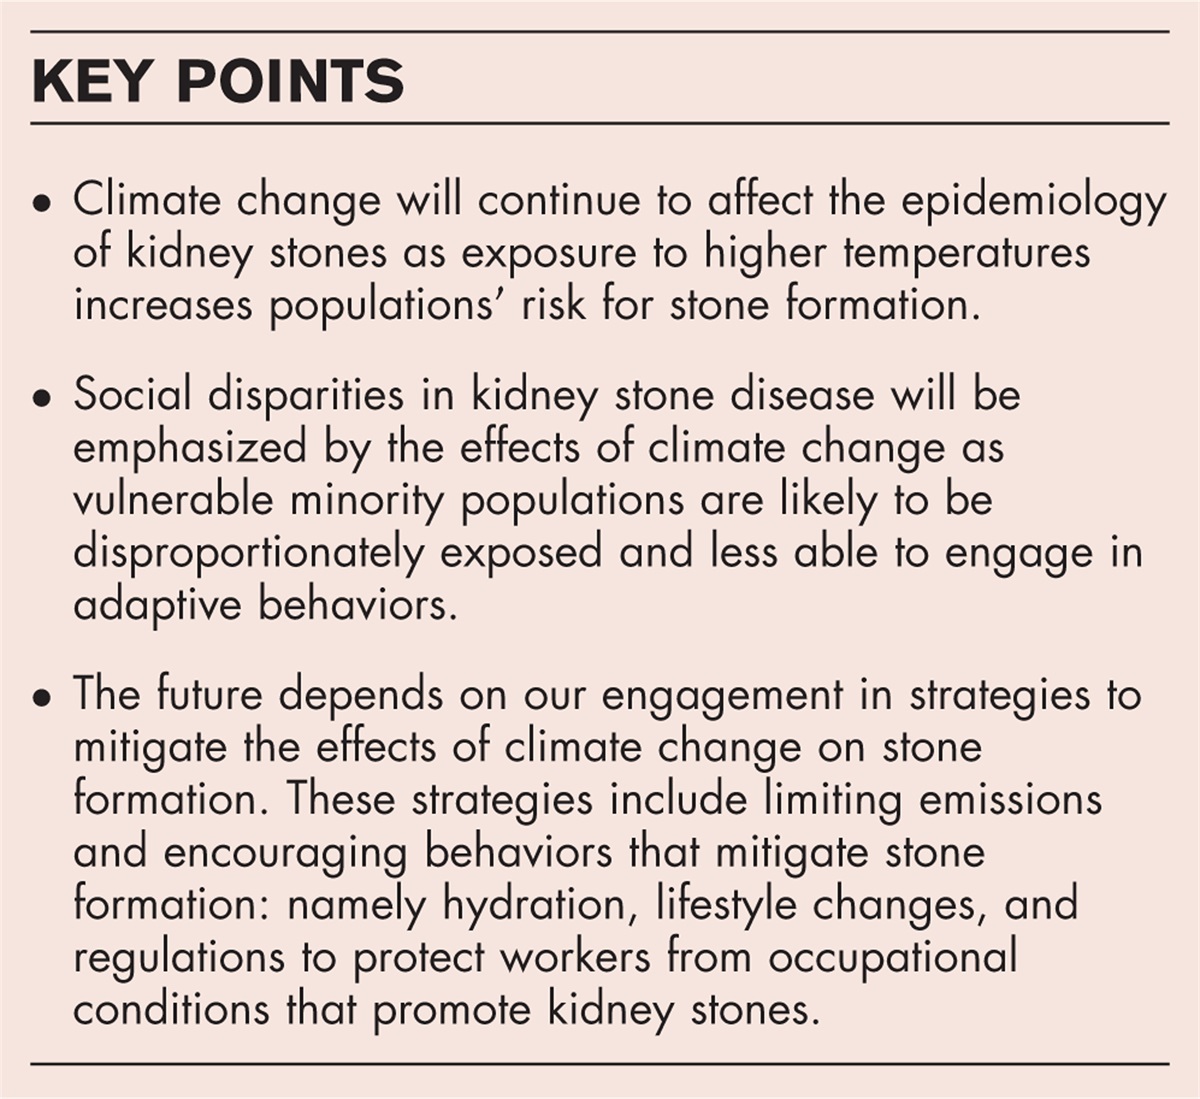 Climate change and kidney stones